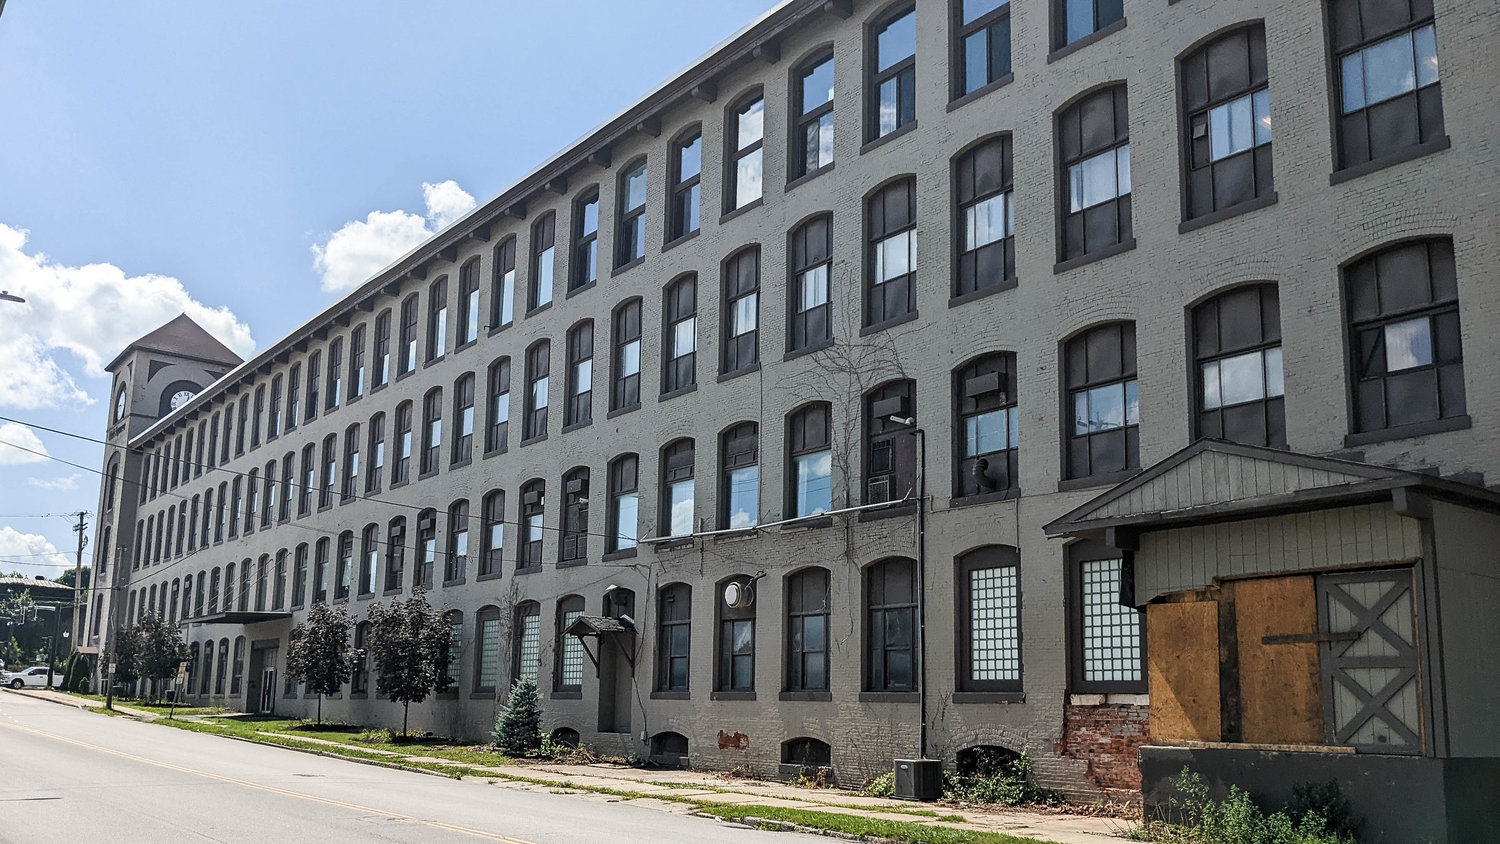 The mill building that once housed the Utica Steam Cotton Factory. The property at 600 State St., Utica, is currently undergoing renovations to accommodate commercial and retail space.